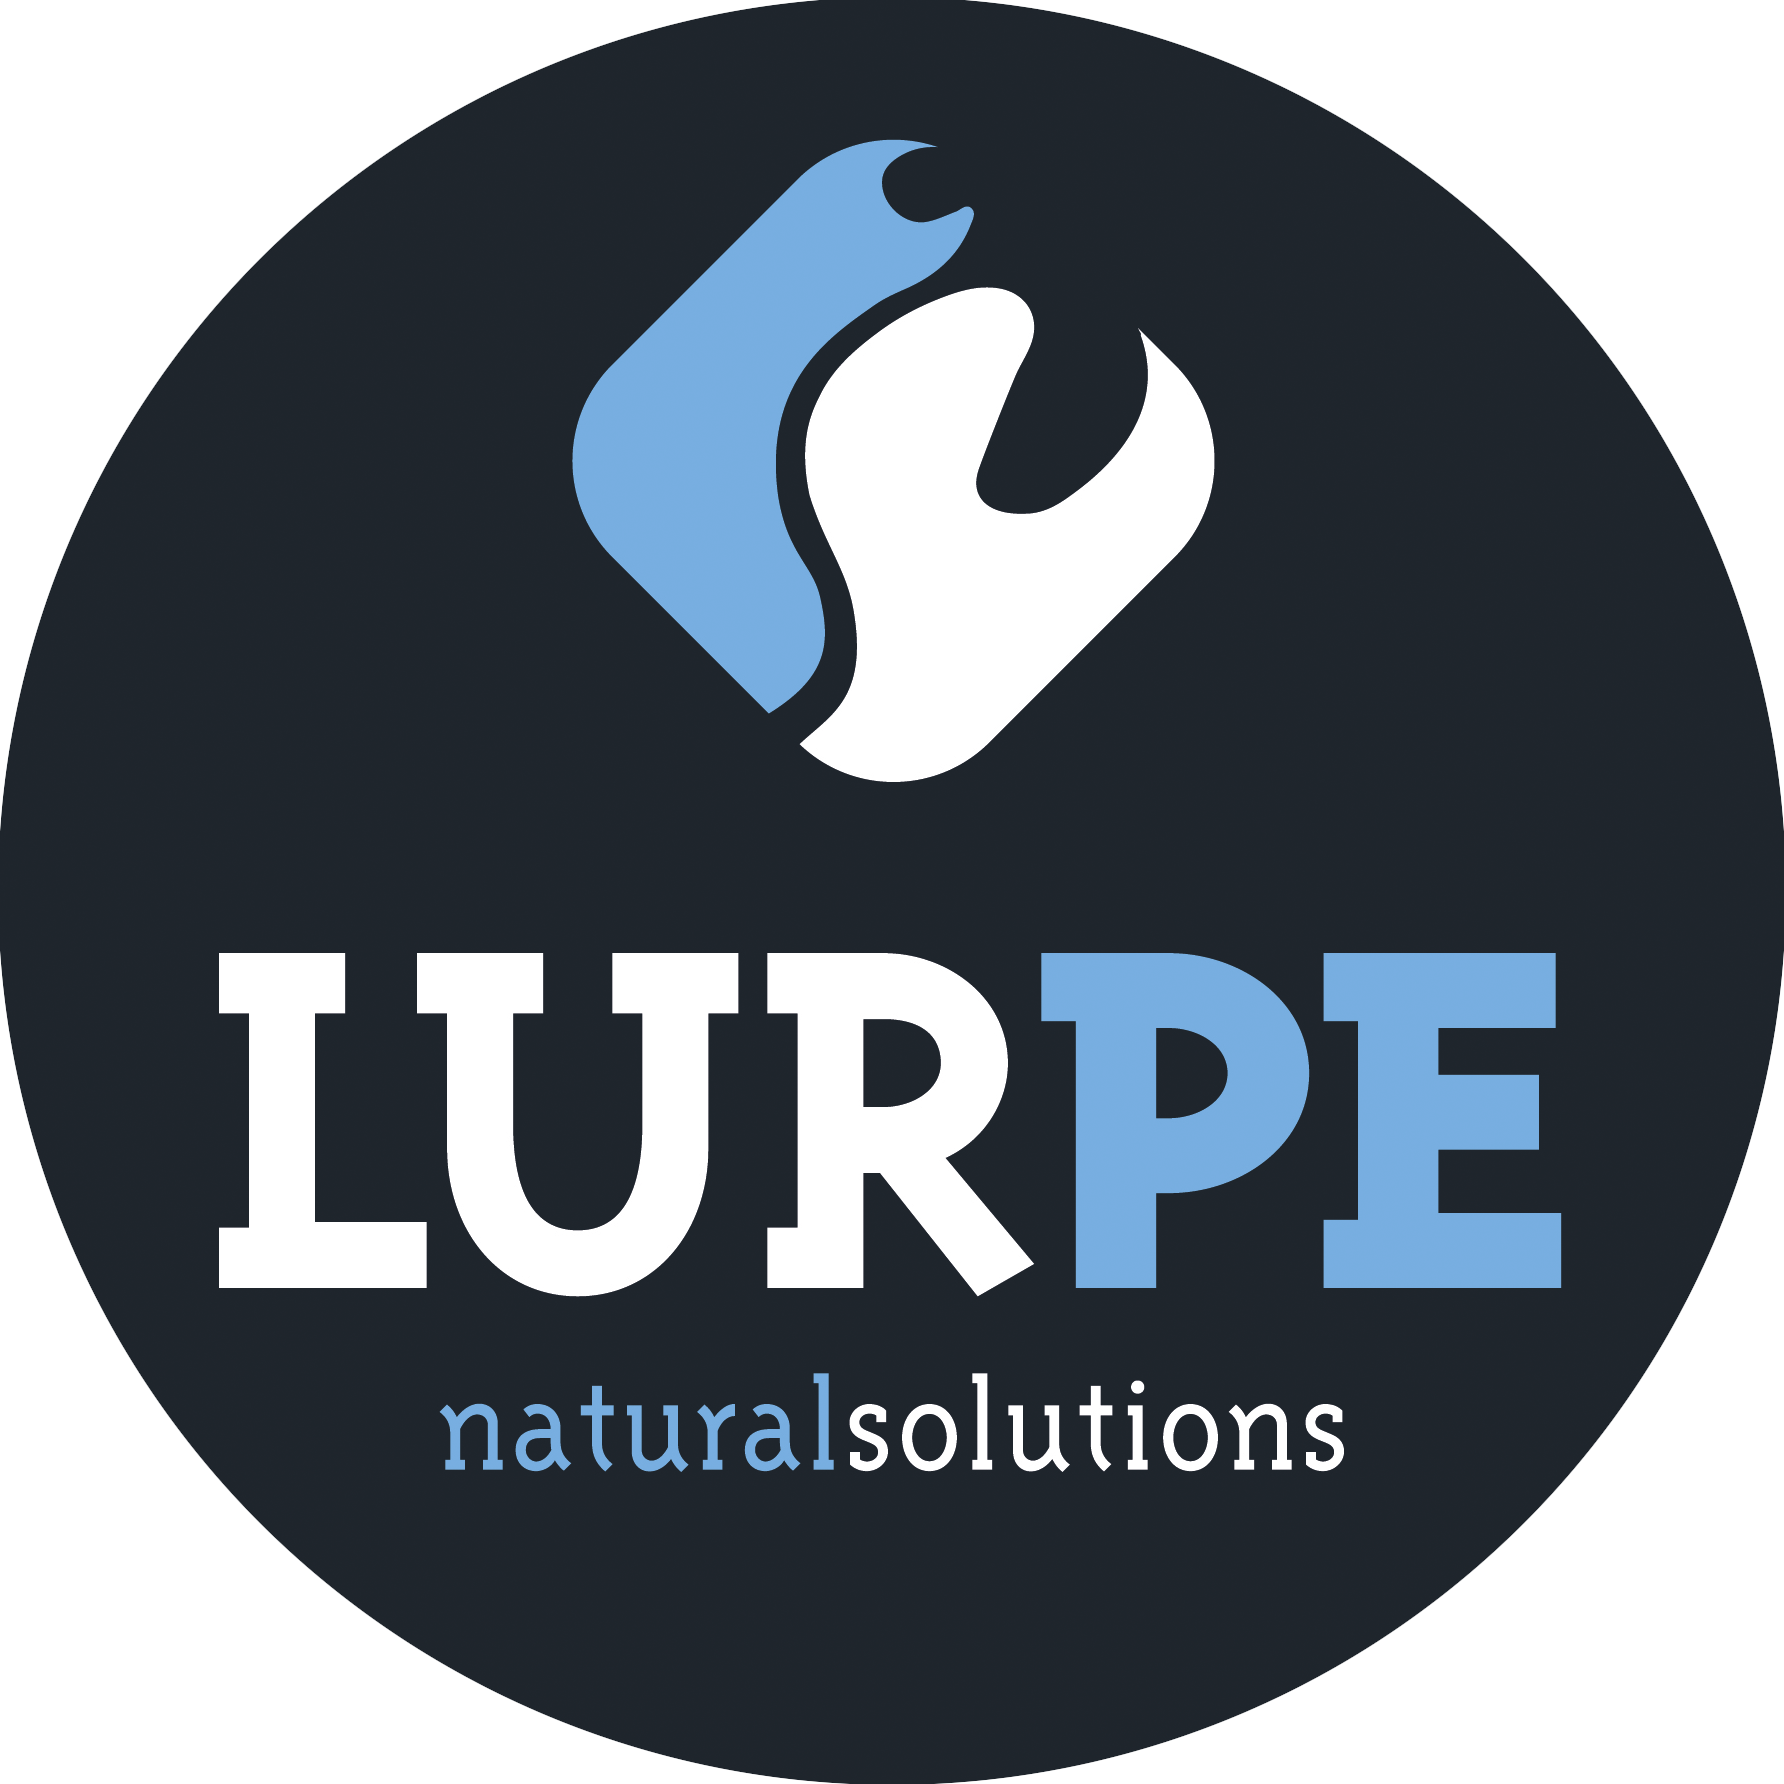 LURPE Natural Solutions